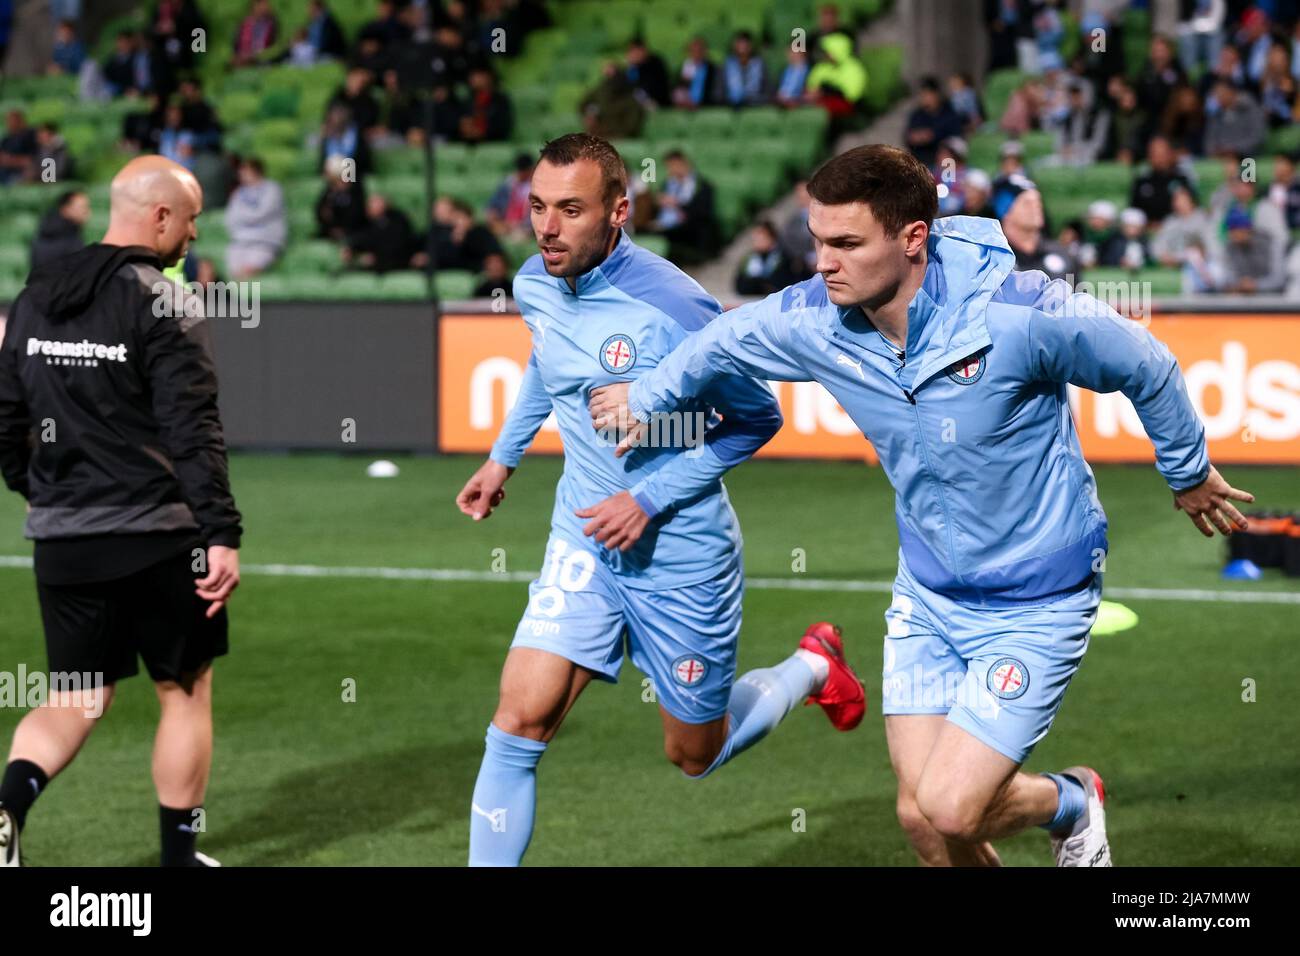 Melbourne, Australia, 28 May, 2022. Melbourne City warm up pre game during the A-League Grand Final soccer match between Melbourne City FC and Western United at AAMI Park on May 28, 2022 in Melbourne, Australia. Credit: Dave Hewison/Speed Media/Alamy Live News Stock Photo